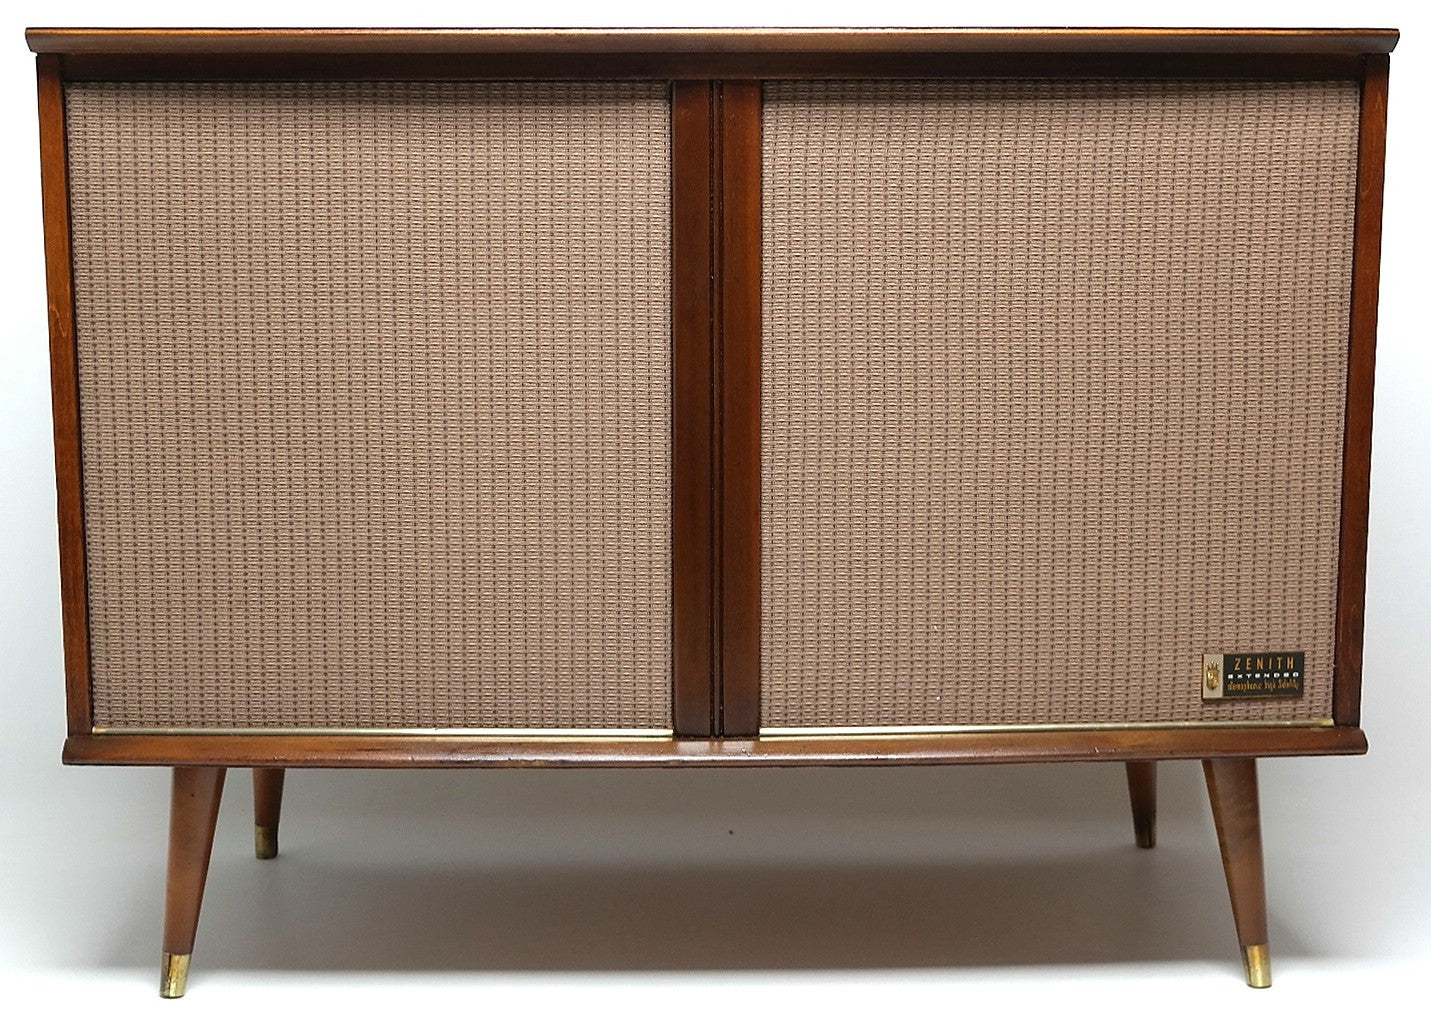 Mid Century Modern Stereo Zenith Console Record Changer - AM/FM - Bluetooth The Vintedge Co.